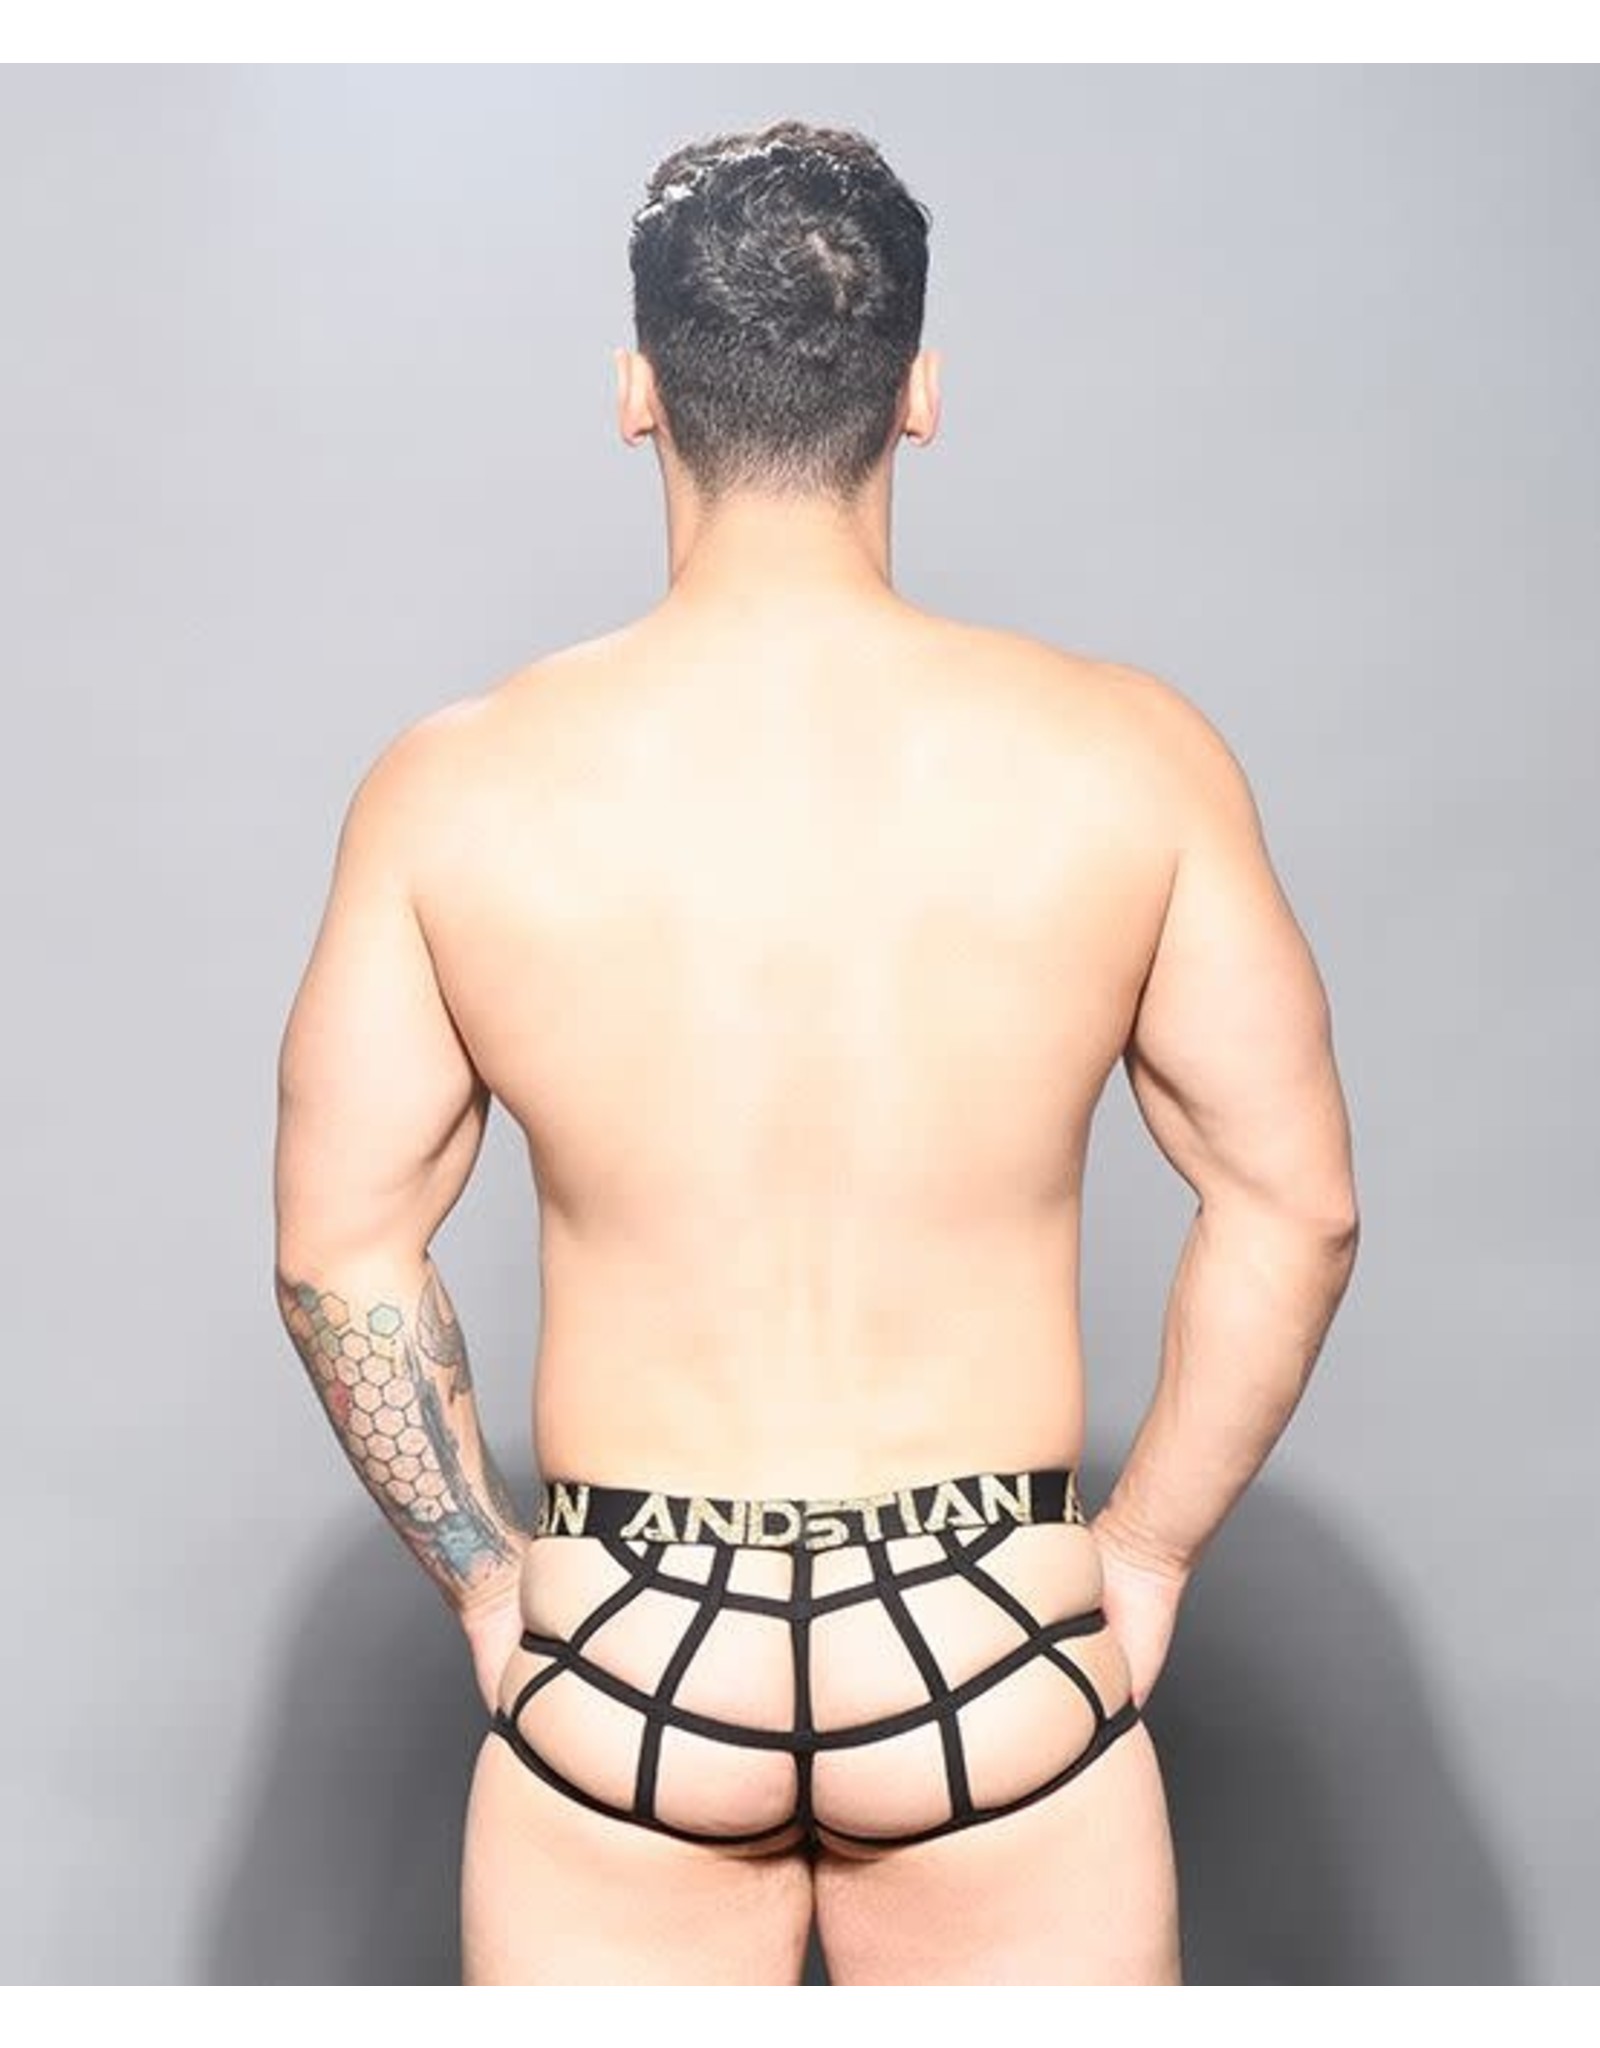 ANDREW CHRISTIAN ANDREW CHRISTIAN - GLAM LEOPARD WEB THONG W/ ALMOST NAKED SMALL